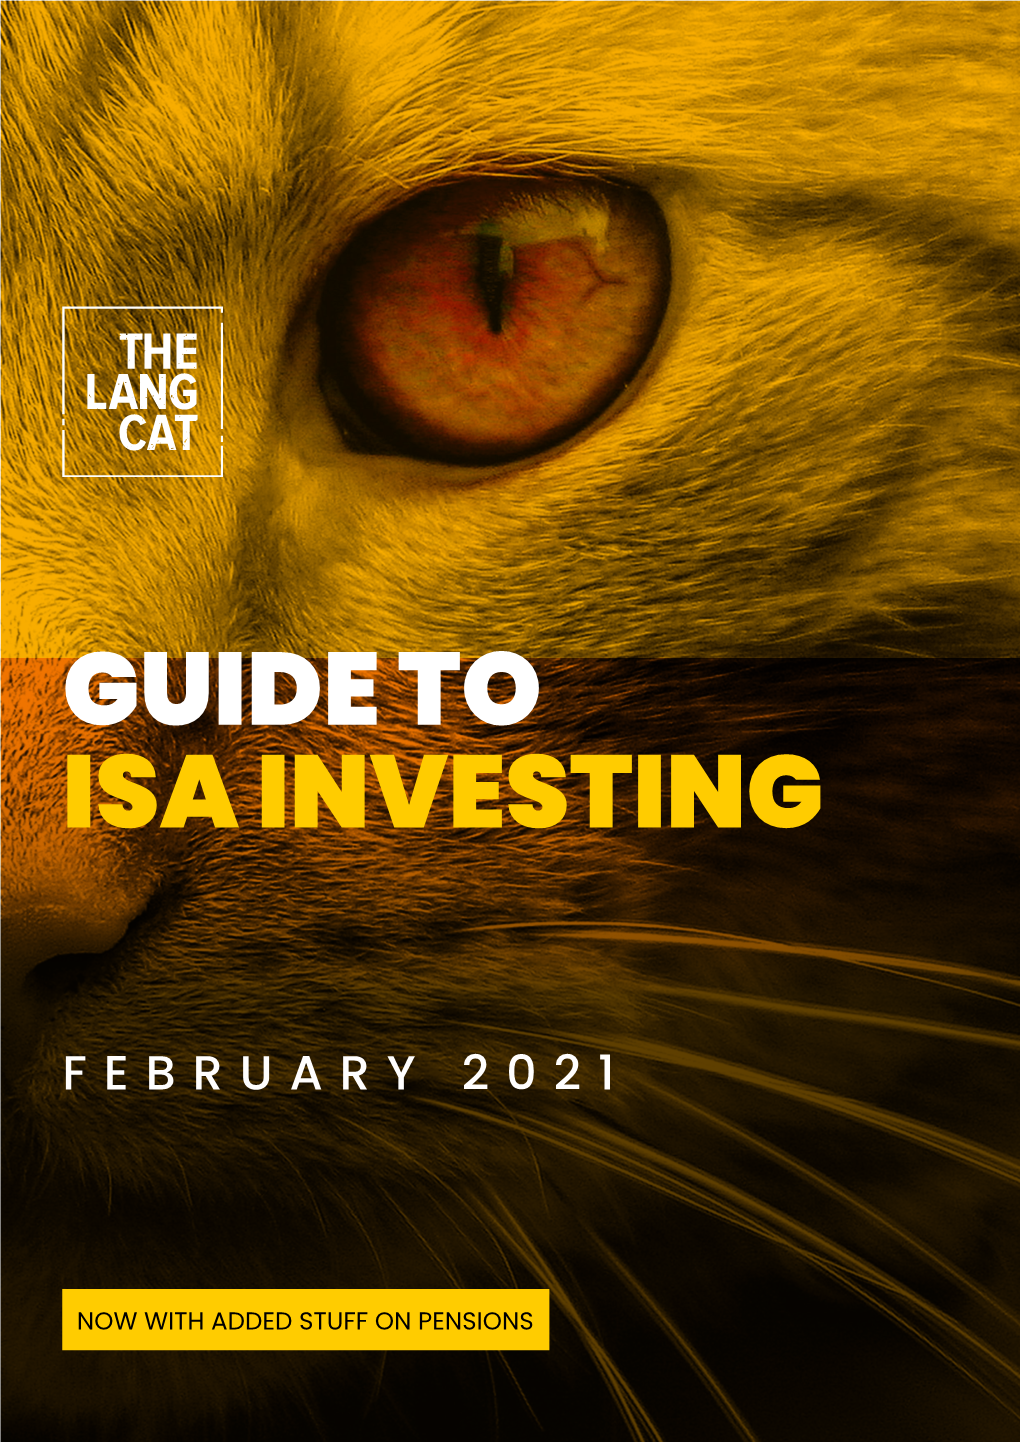 Guide to Isa Investing